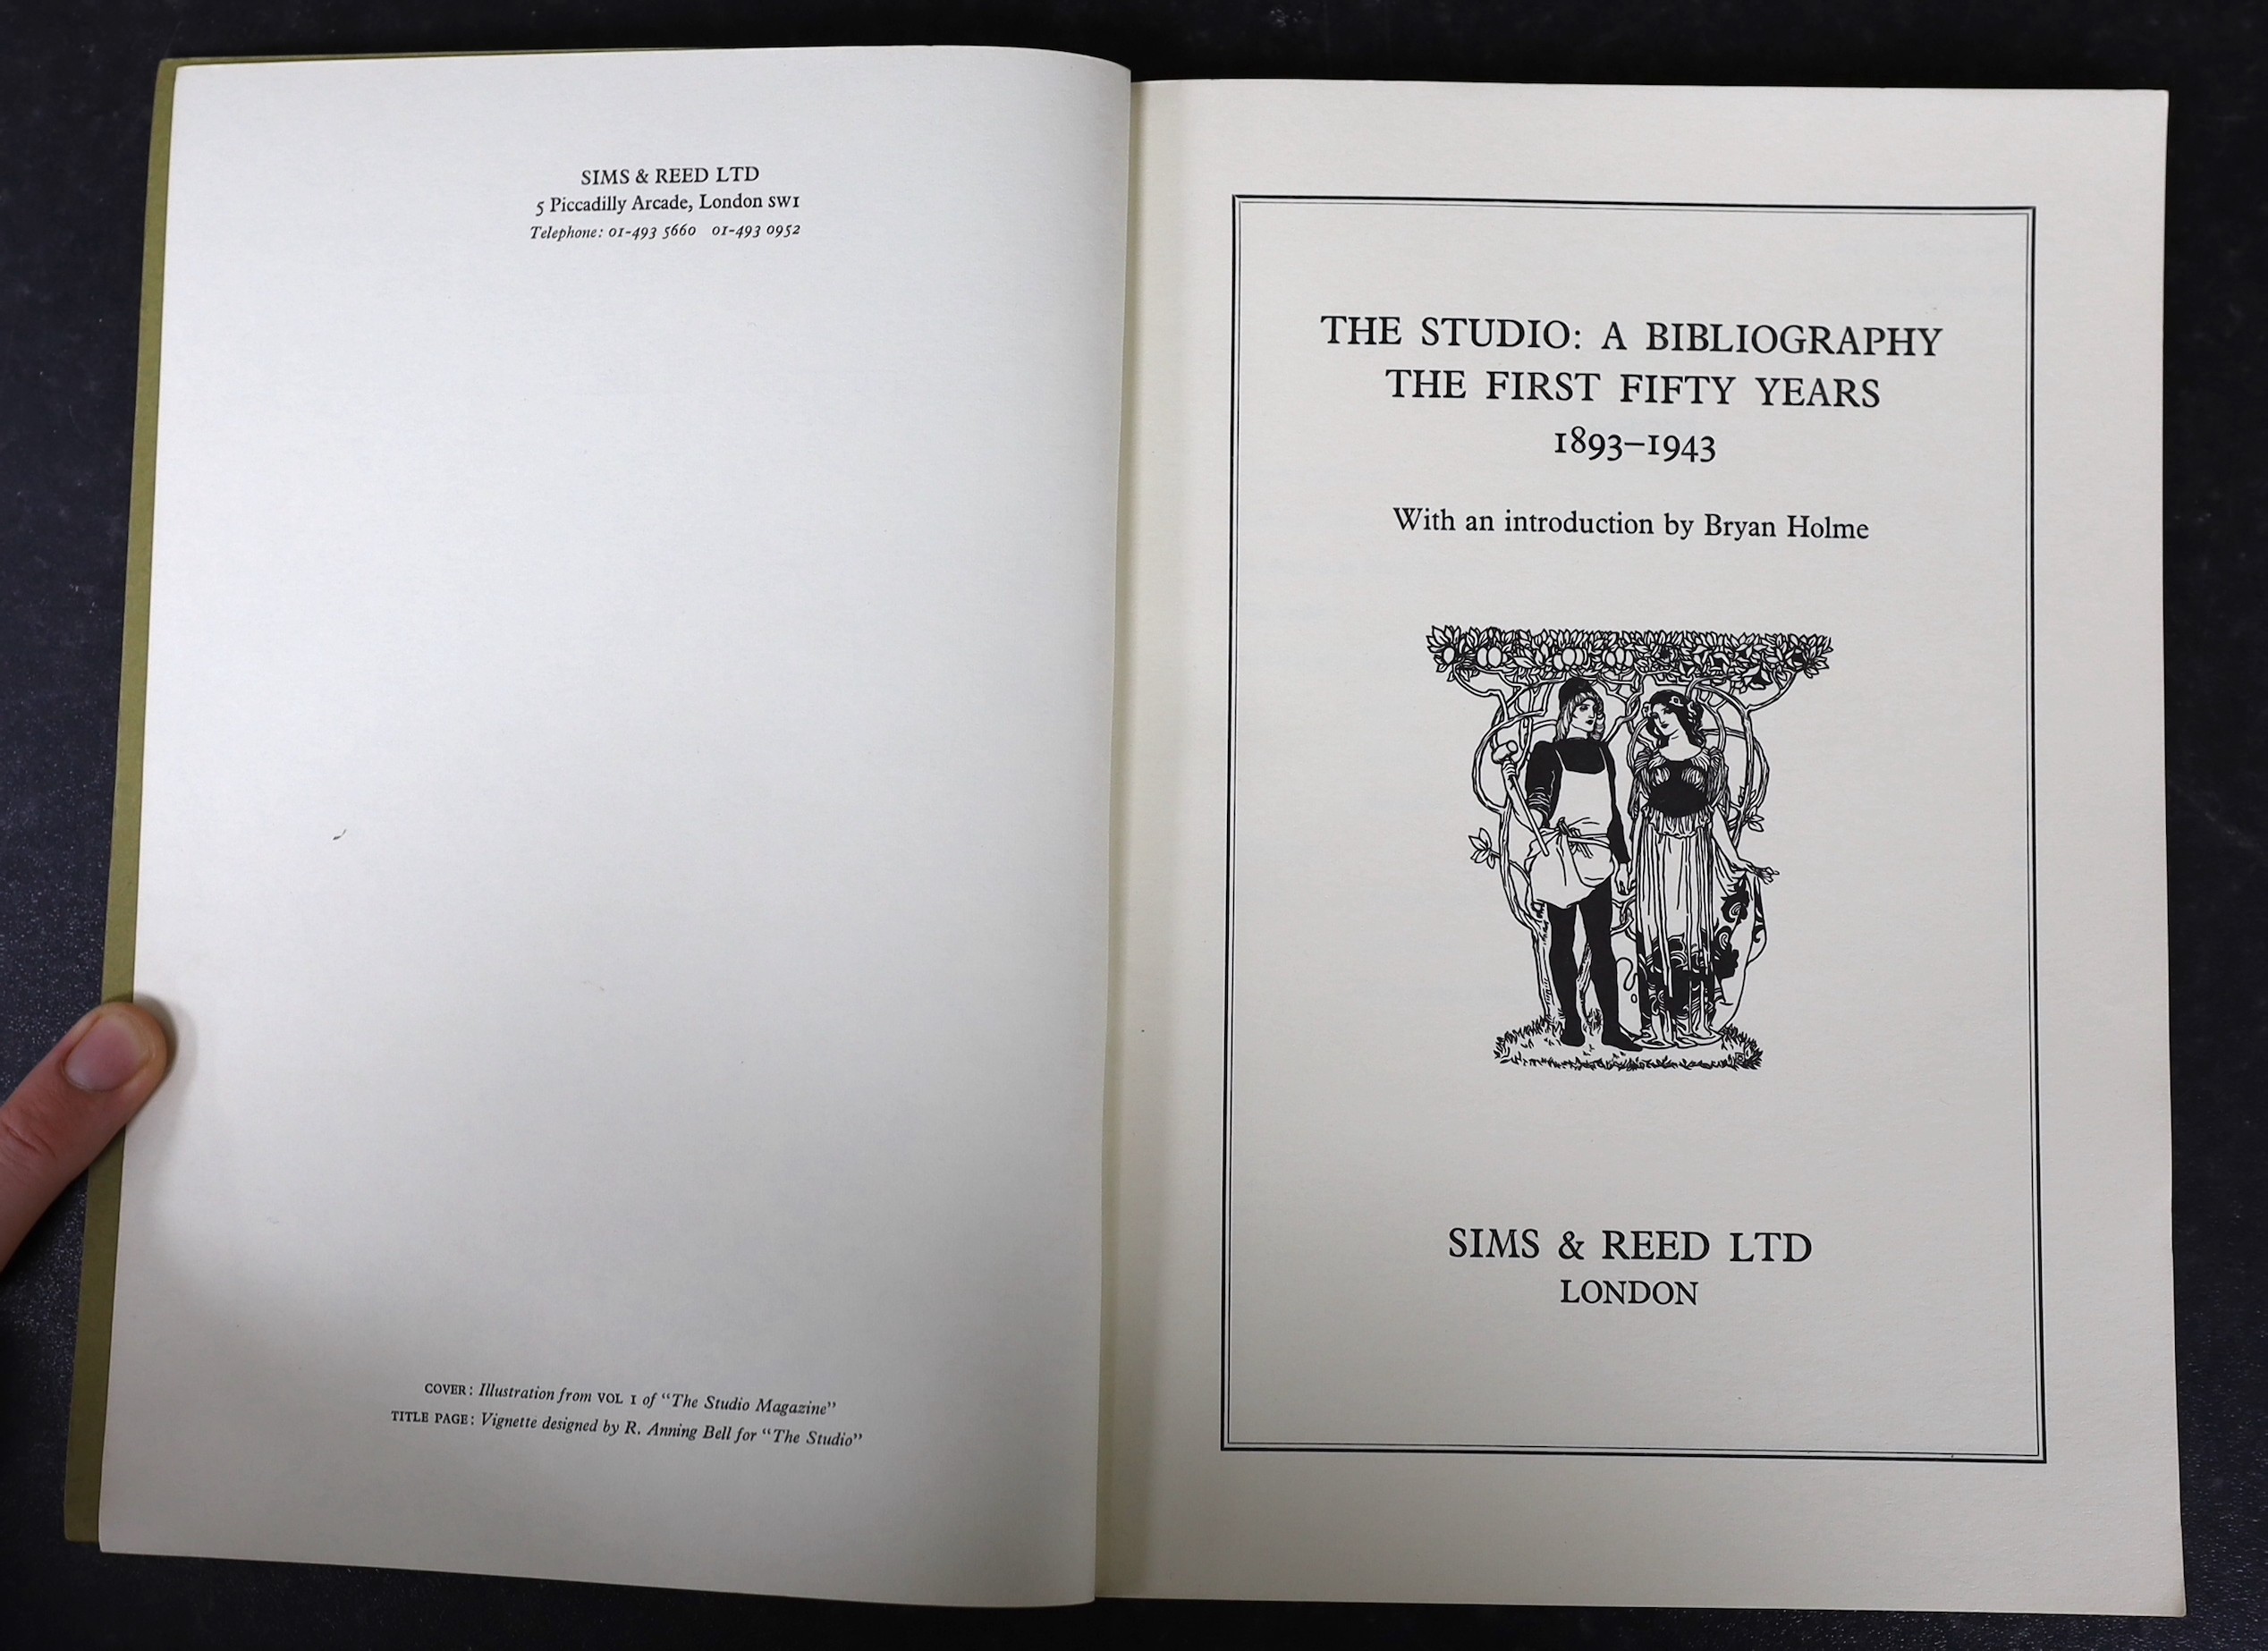 The Studio - the following bound vols (publisher's cloth): 12, 17, 18, 20 - 22, 25, 29, 30, 33-37, 39, 44, 45 and 51 (1898-1911); together with loose monthly issues (original wrappers): 1906-1956, 72 various